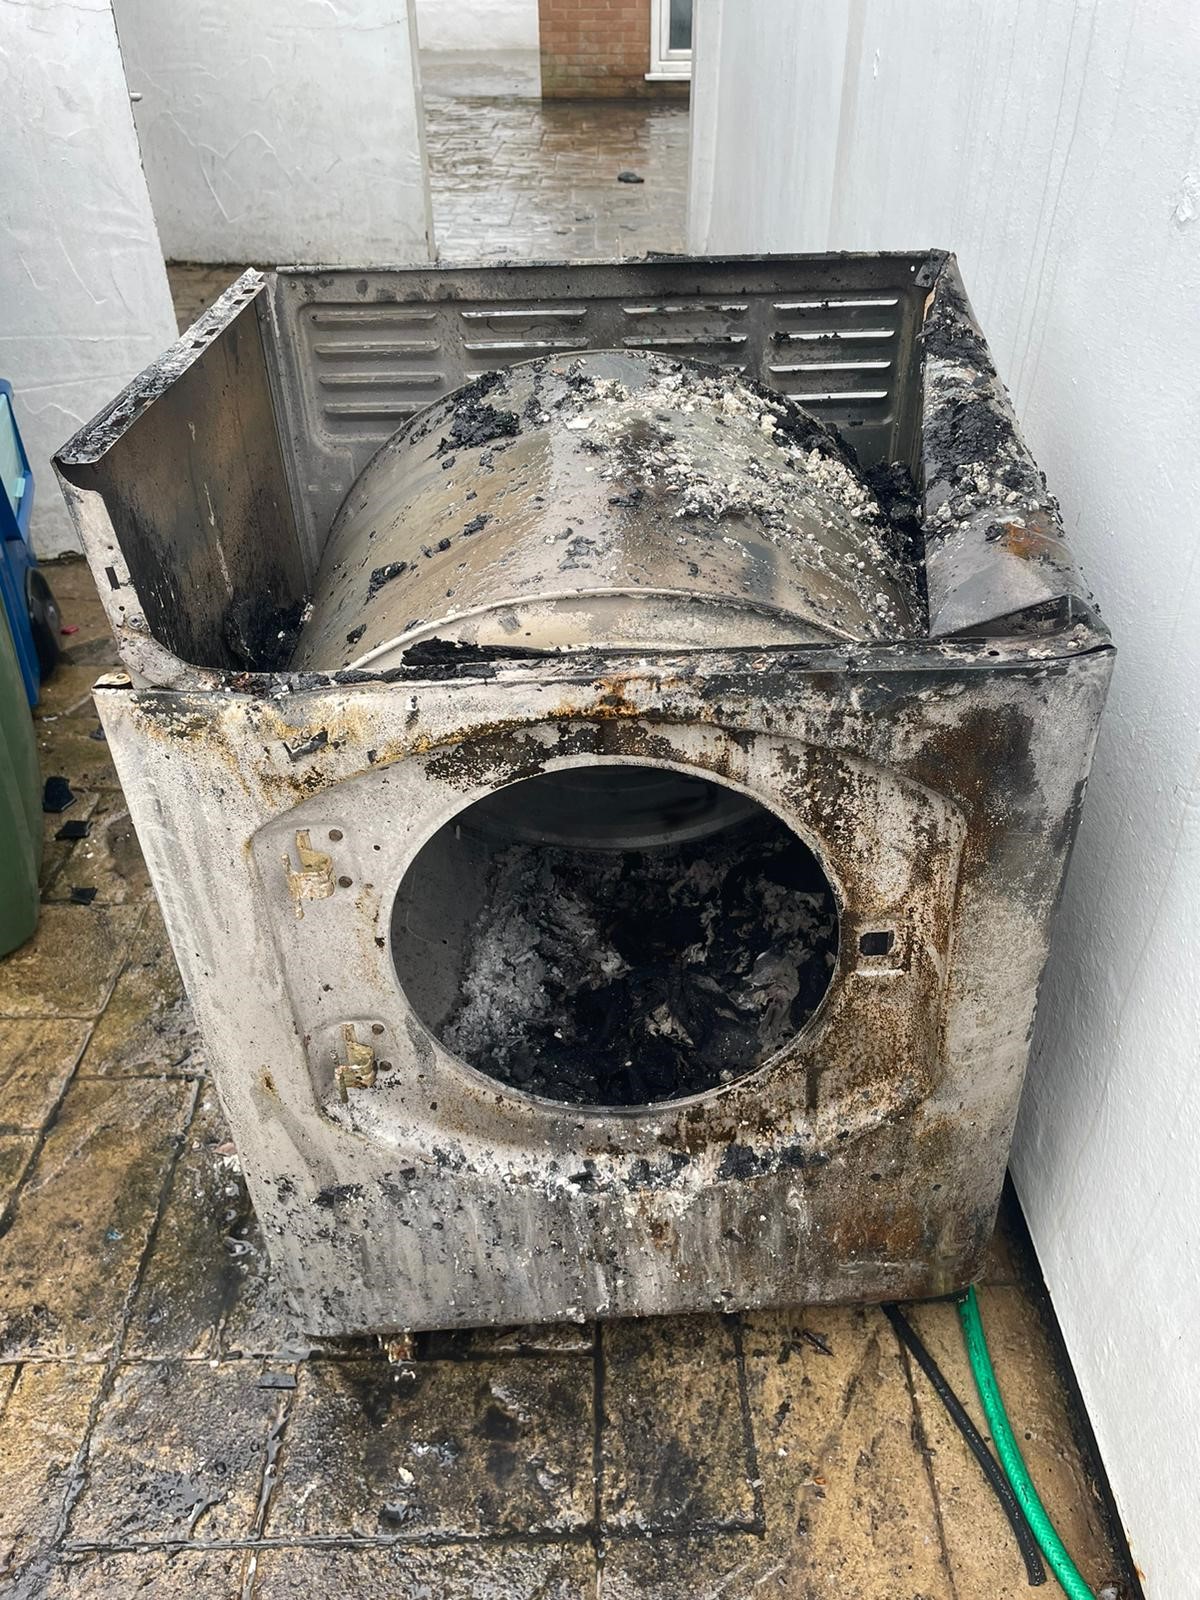 Crews attend two further tumble dryer fires in 24hs